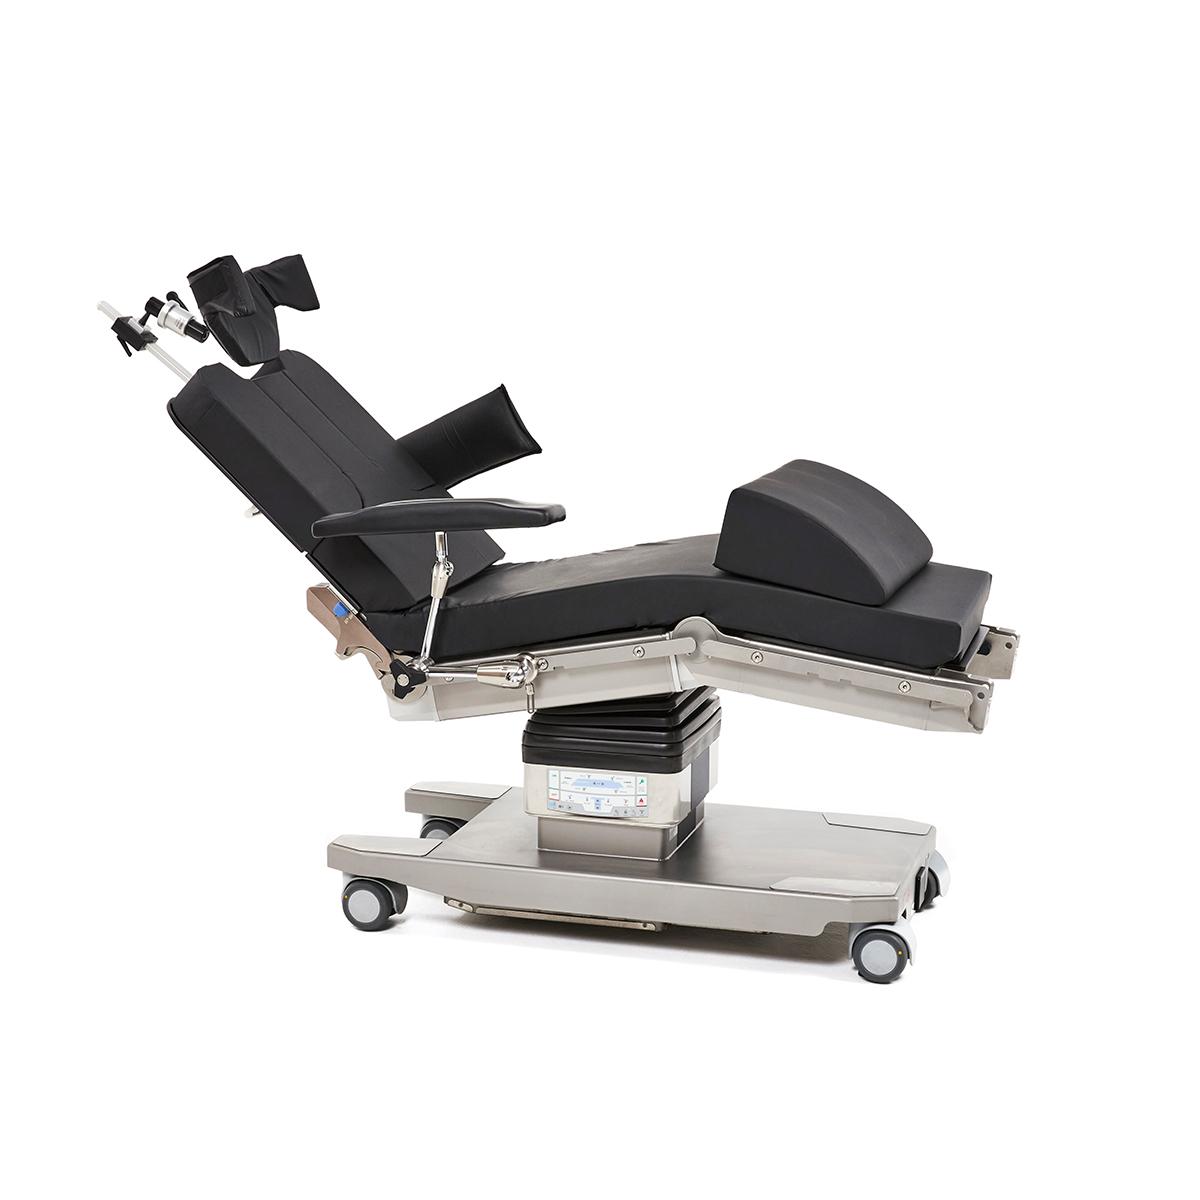 Hillrom shoulder chair surgical table equipped with accessories for positioning patients.